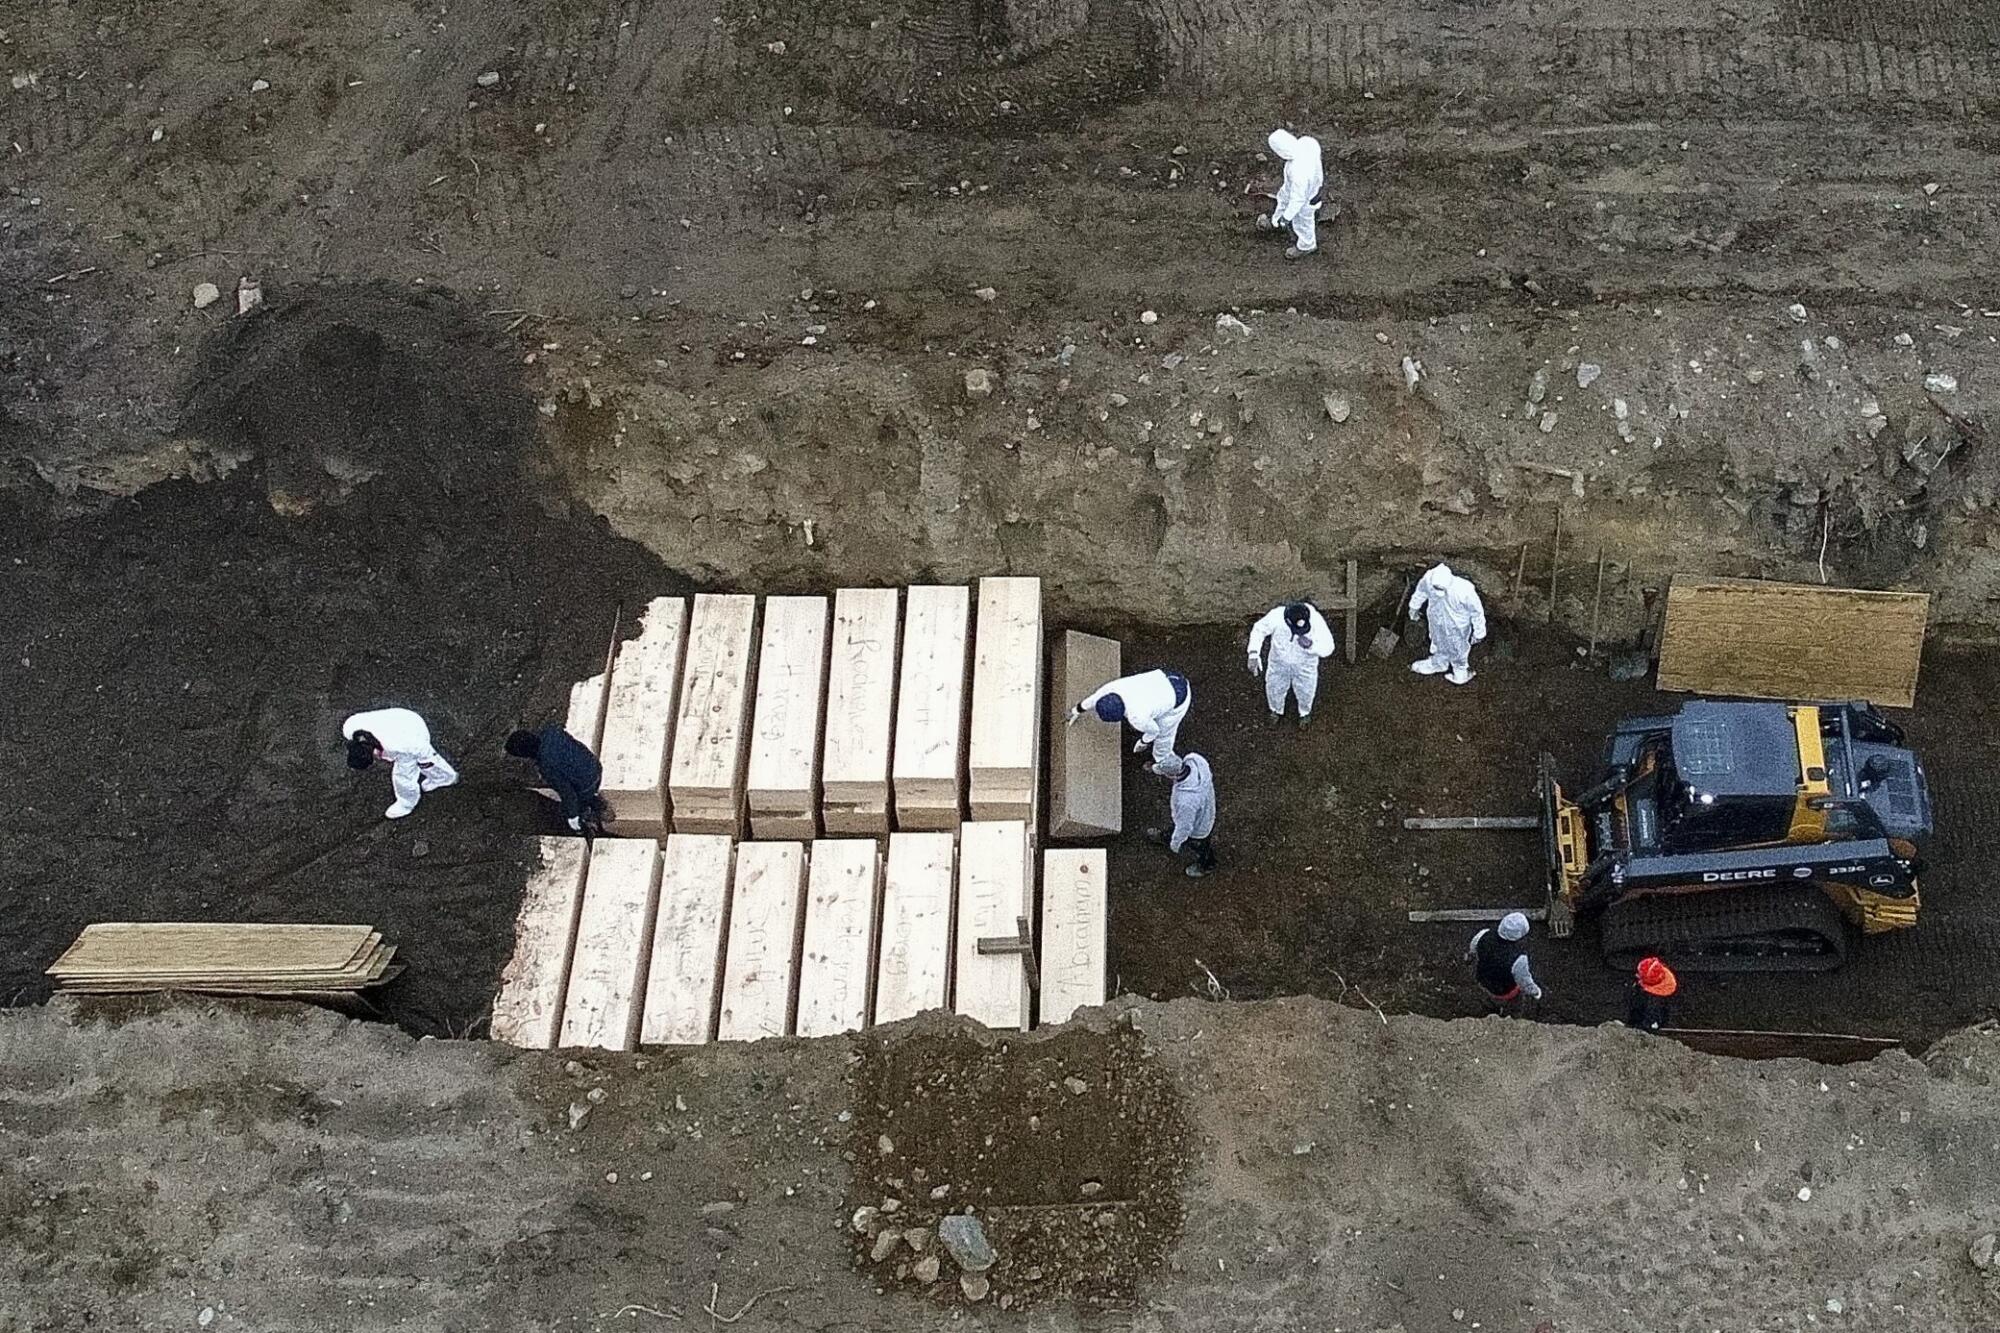 Aerial view of workers burying bodies in a trench.